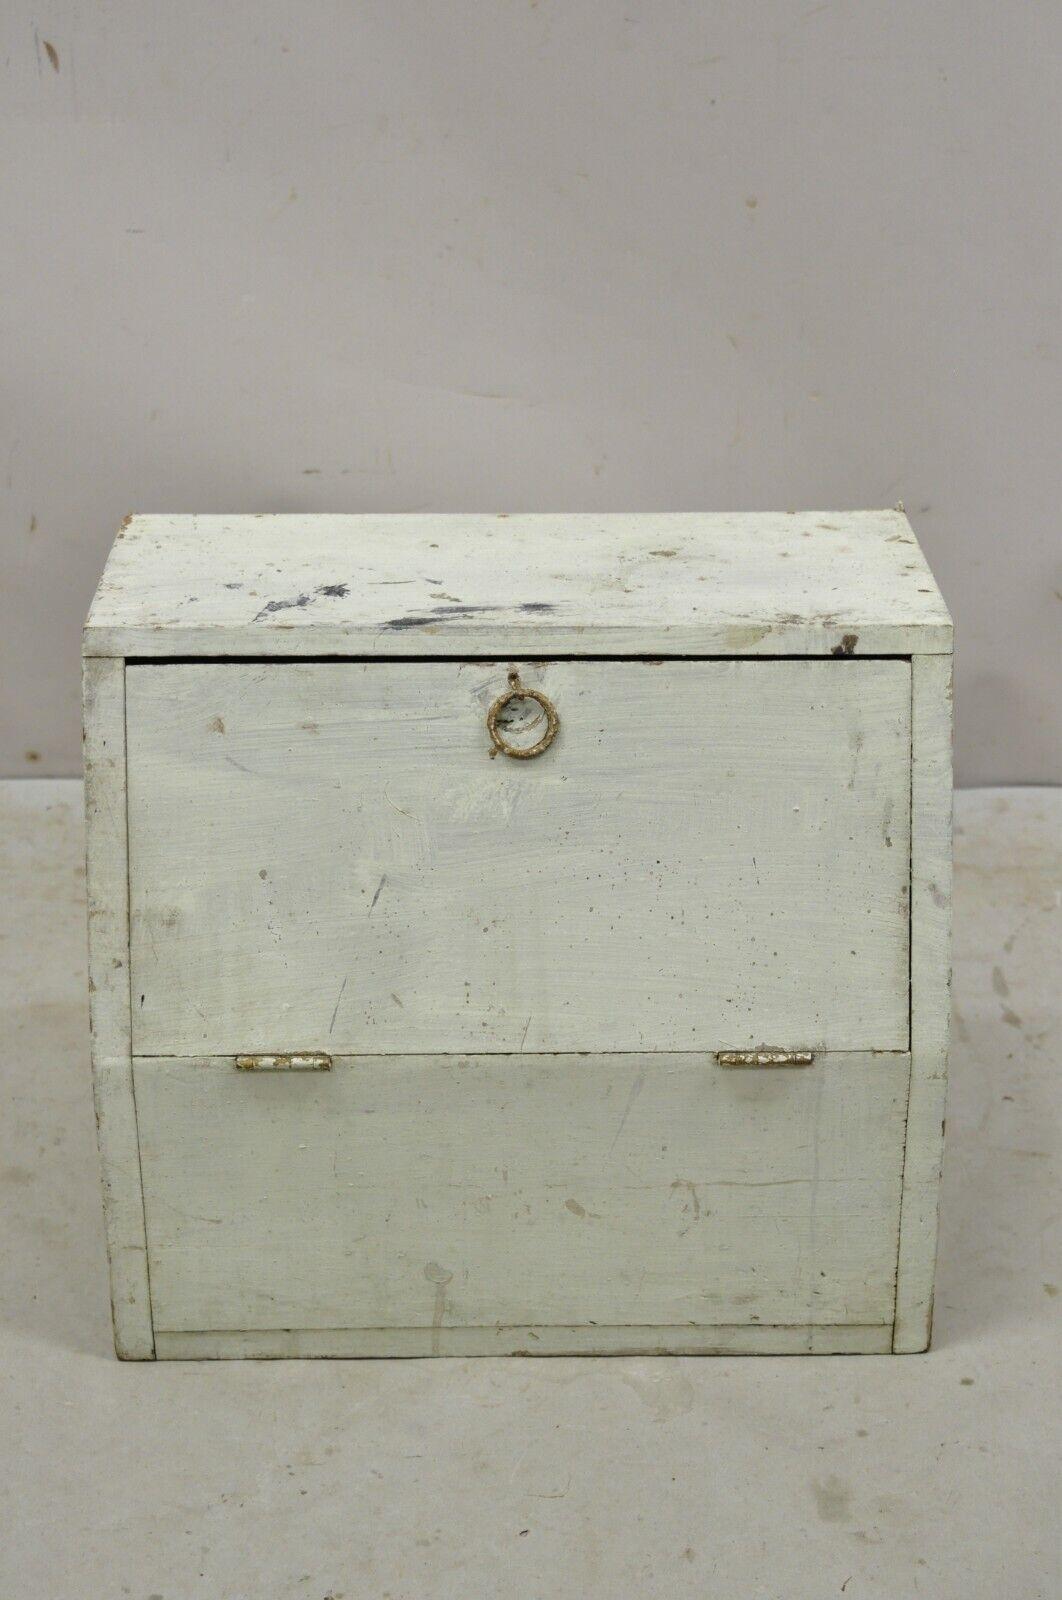 Vintage Arts & Crafts Wooden Green Painted Shoe Polish Box Tool Chest. Circa Early 20th Century. Measurements: 15